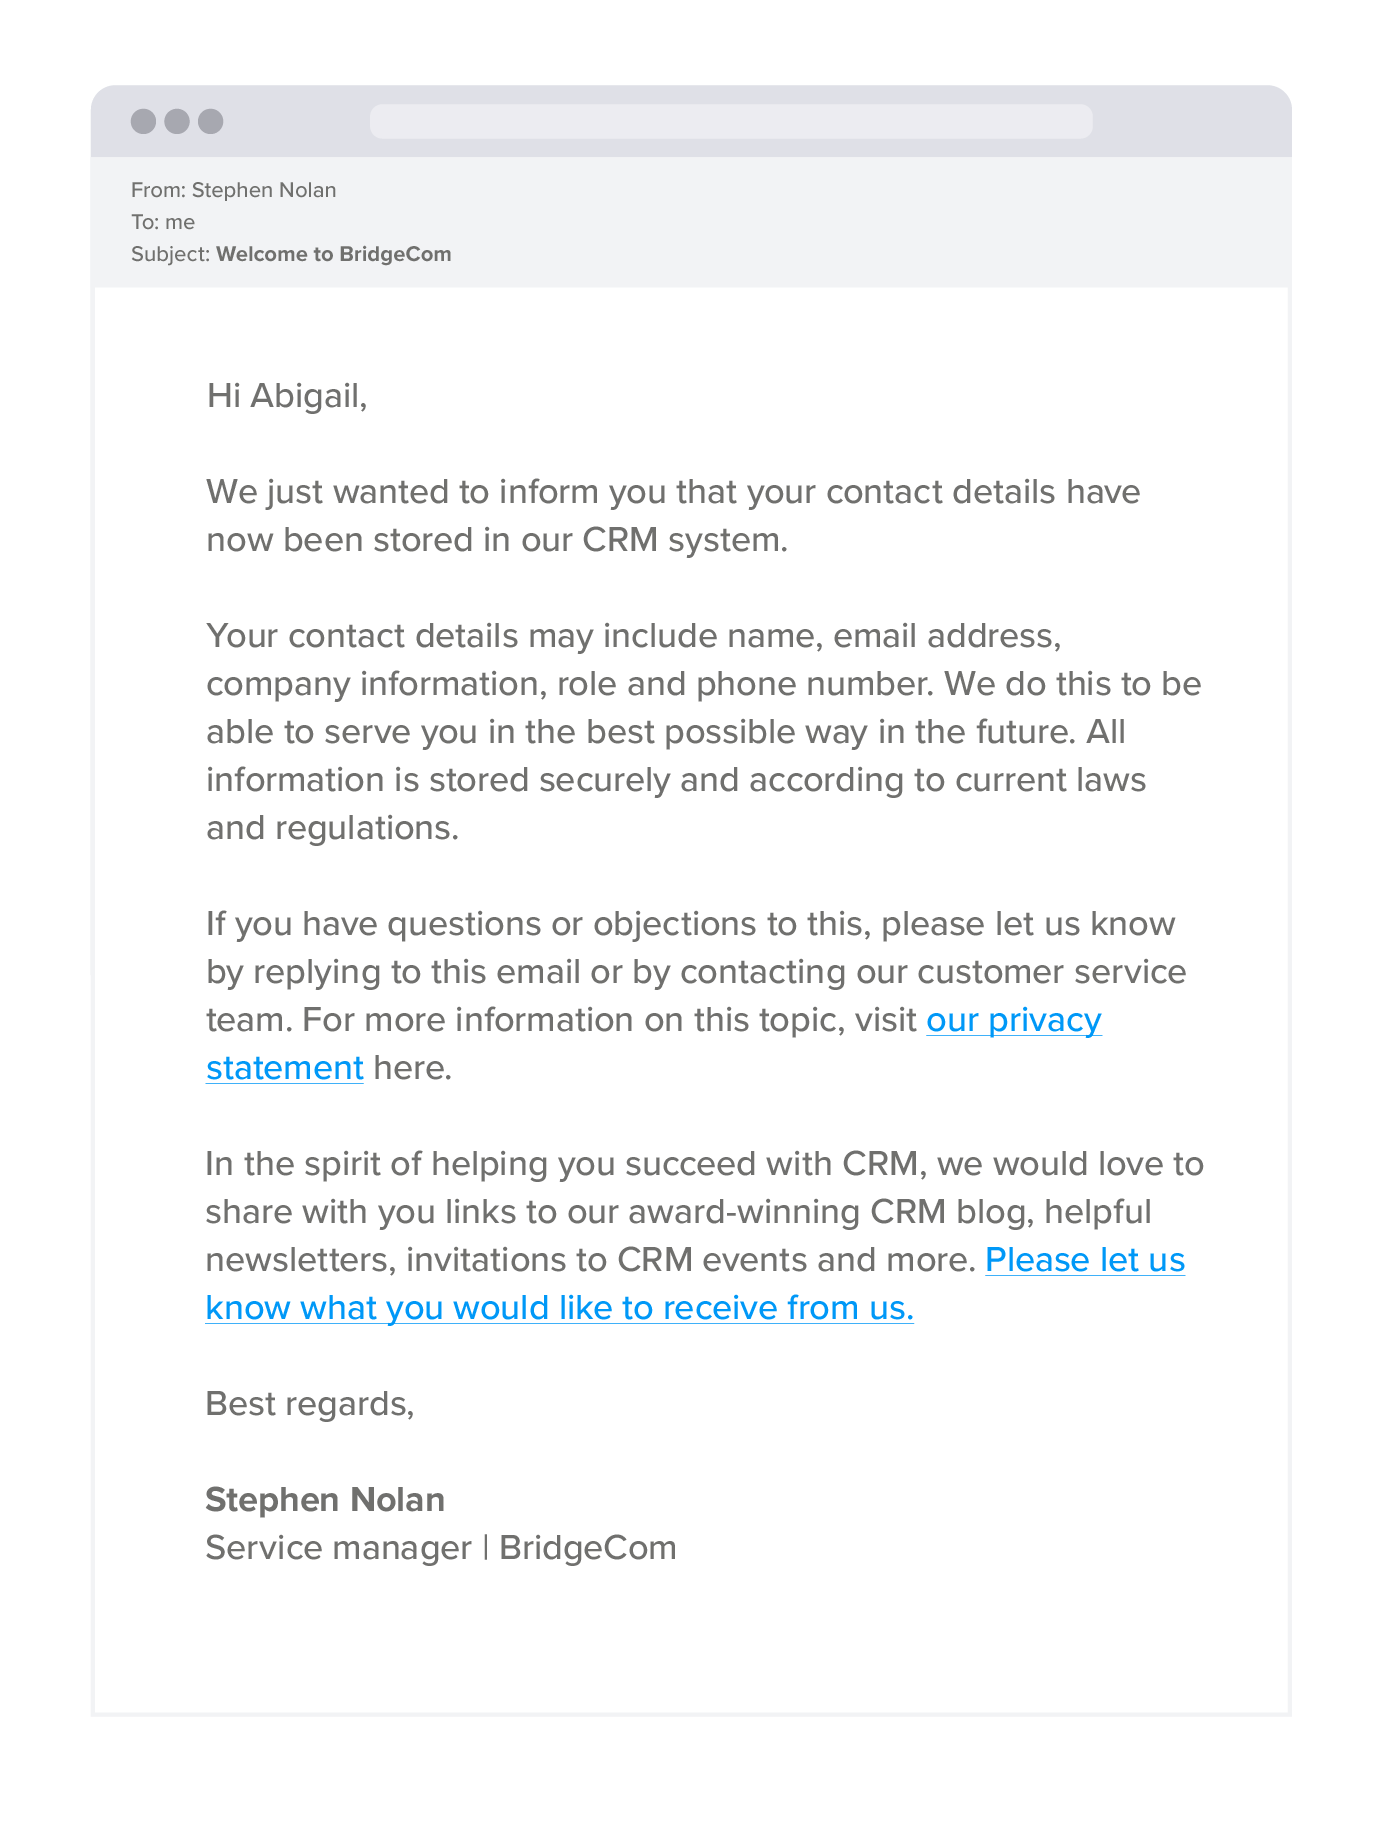 Consent notification email